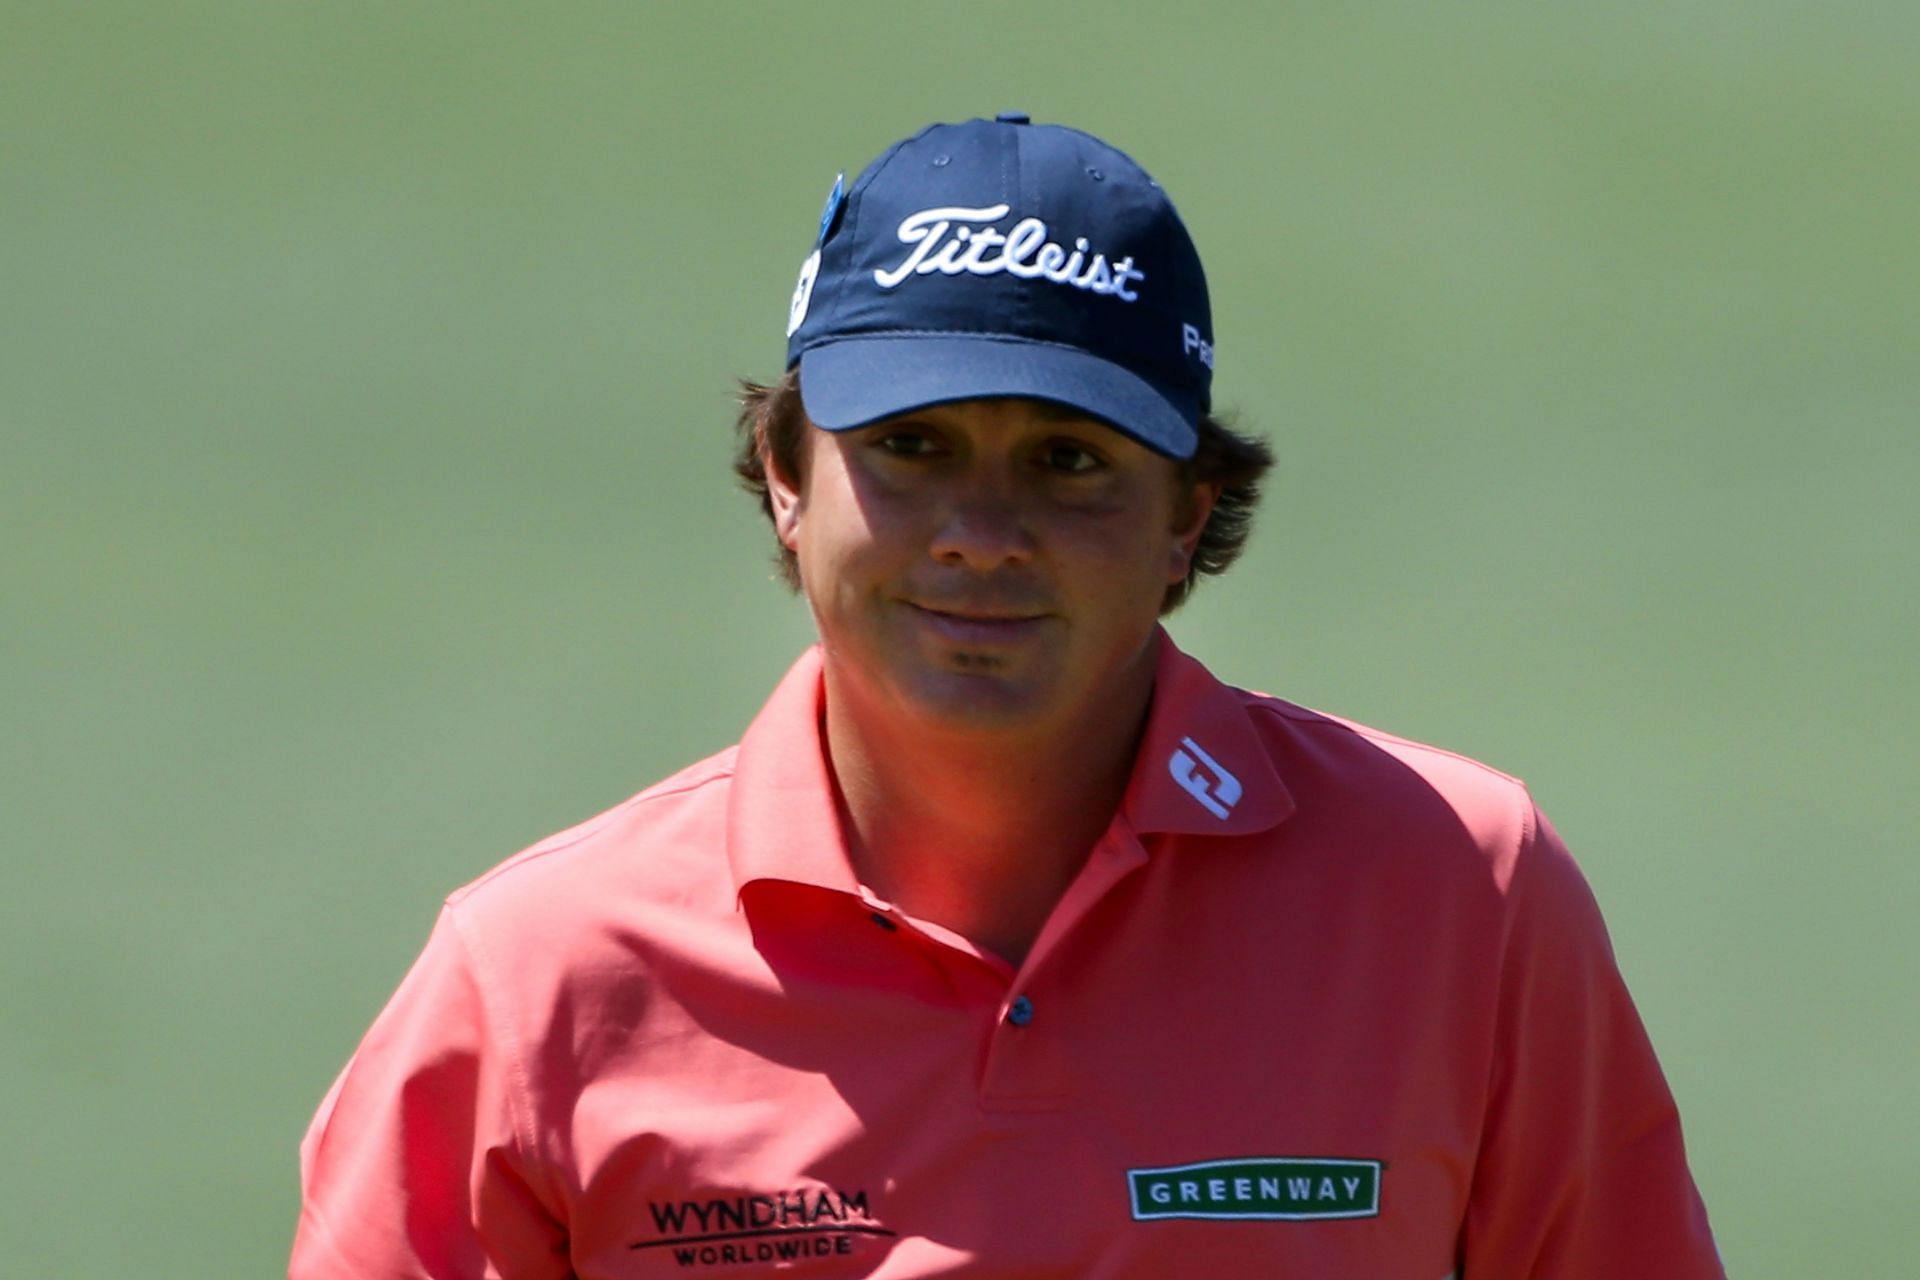 Jason Dufner looks on from the second green during the third round of the 2012 Masters Tournament